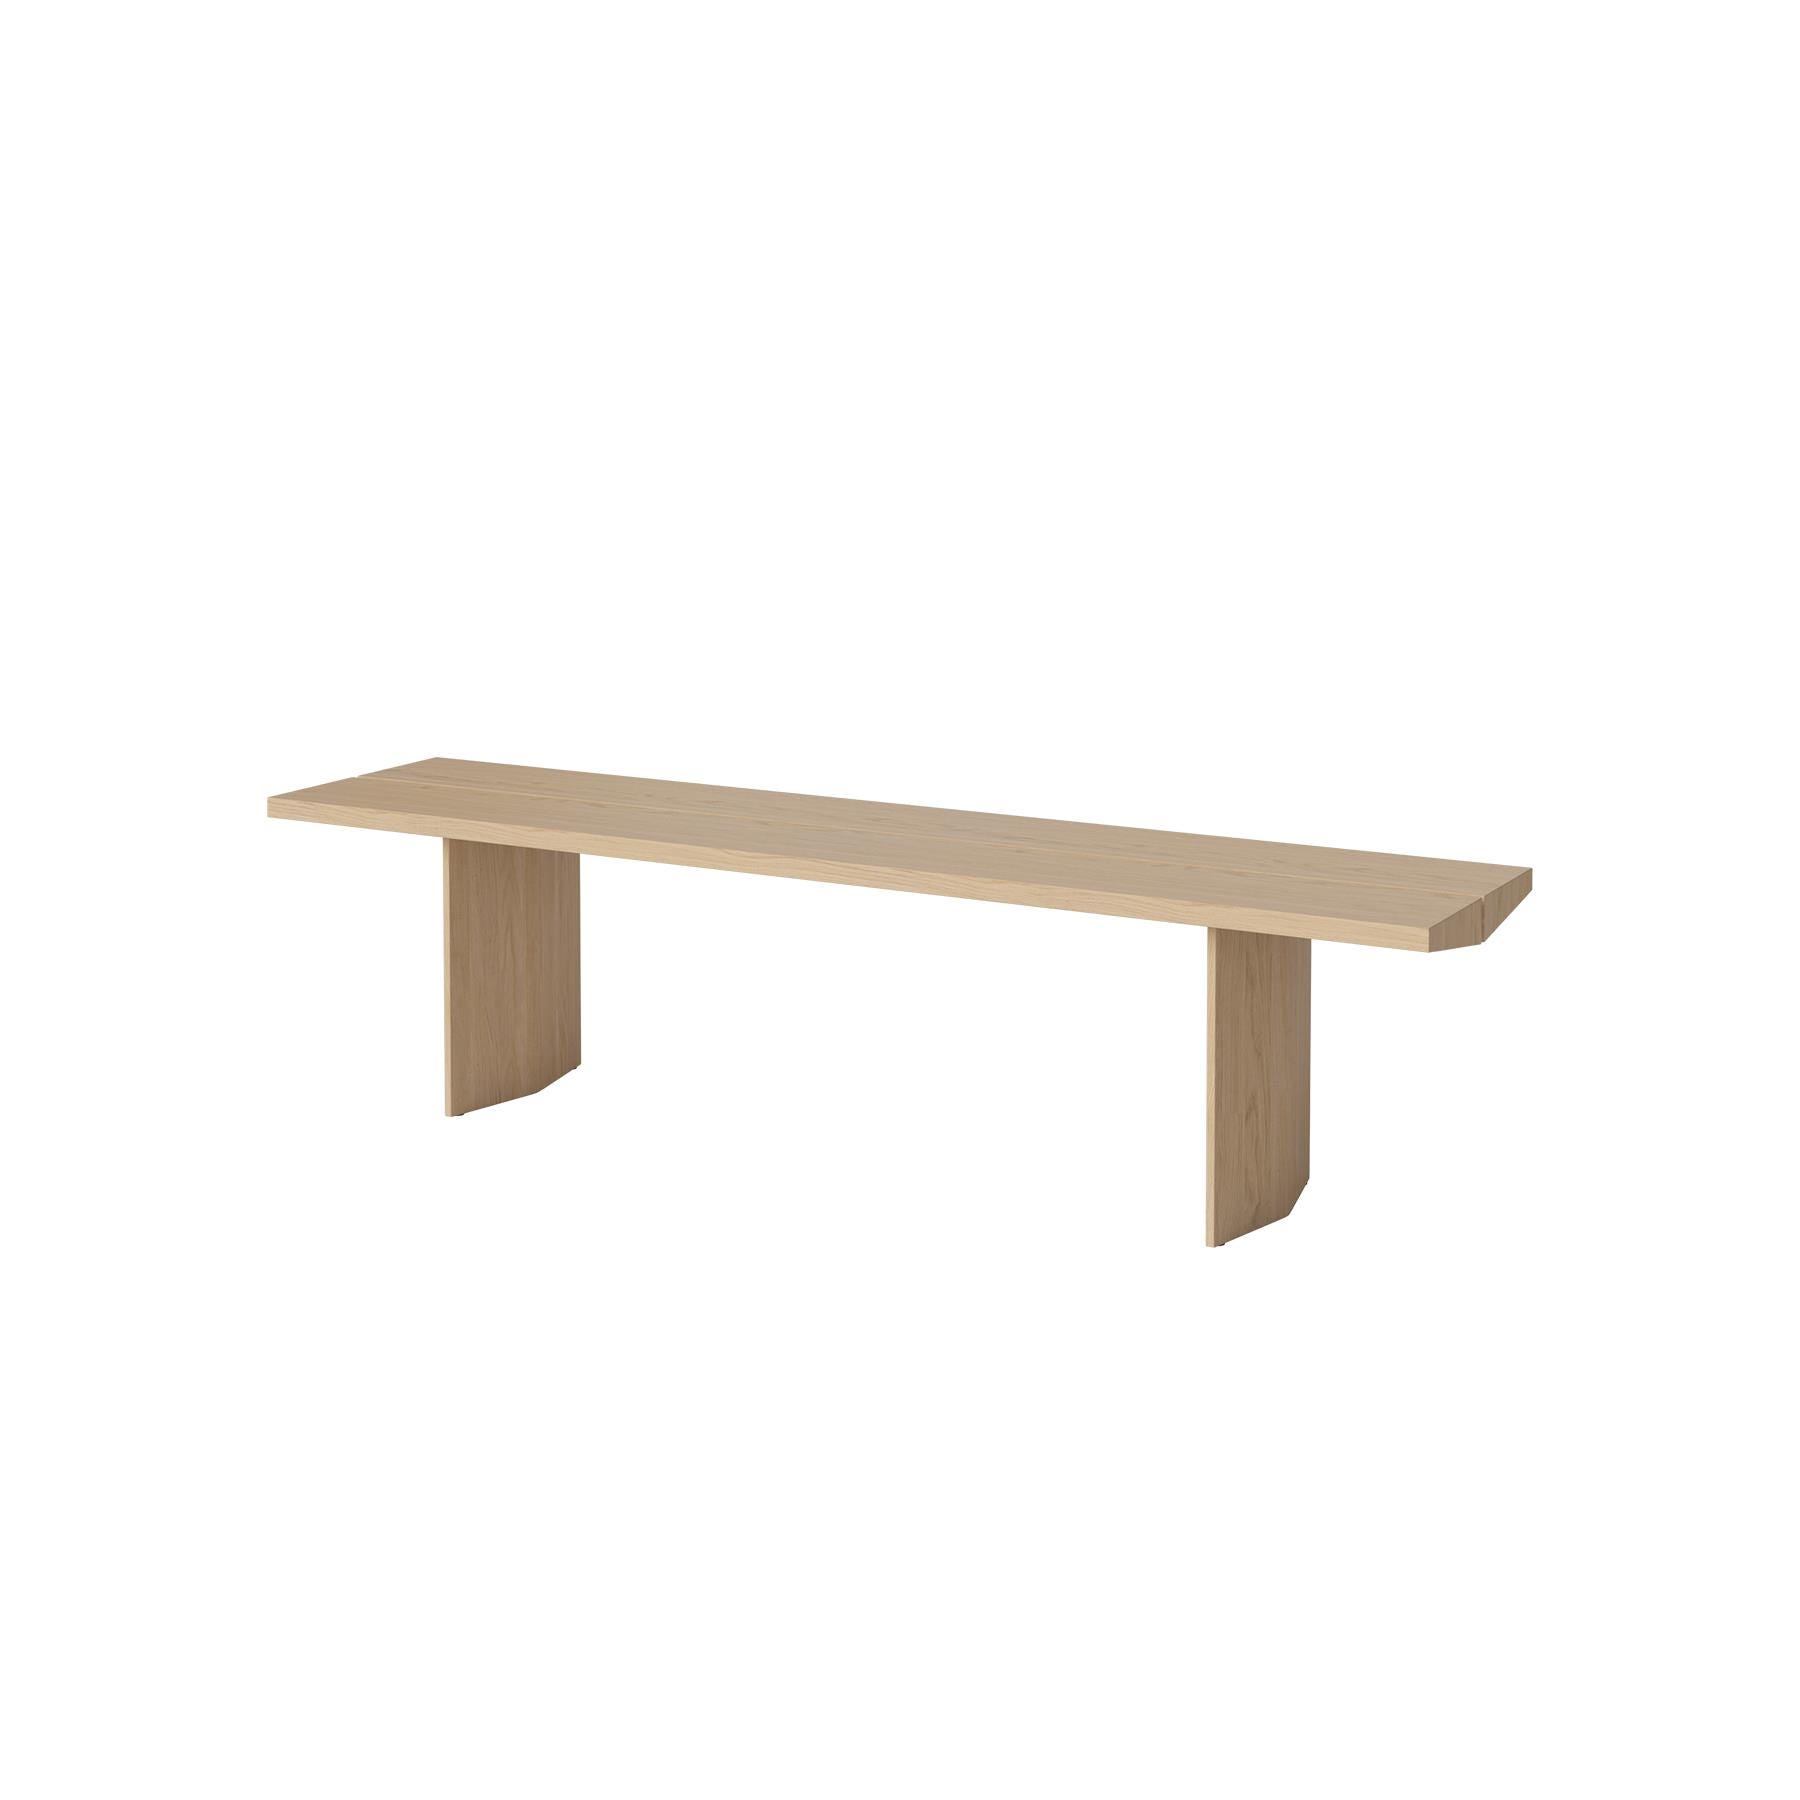 Bolia Alp Dining Bench White Oiled Oak Lenghth 180cm Light Wood Designer Furniture From Holloways Of Ludlow